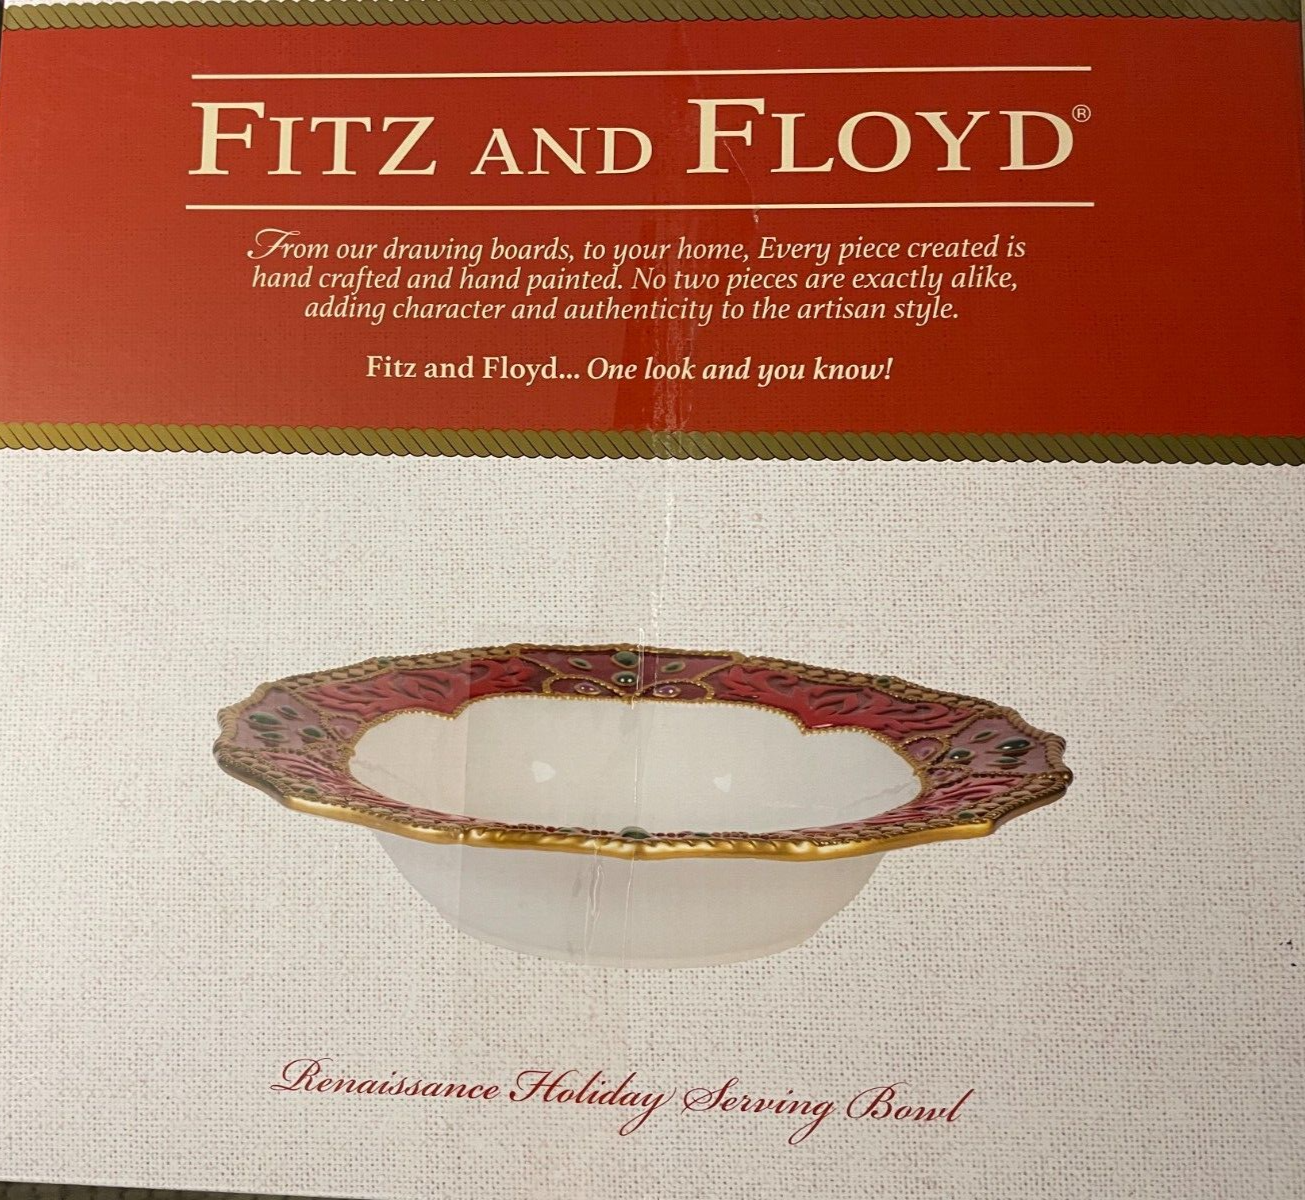 Fitz and Floyd Renaissance Holiday Serving Bowl - $34.65